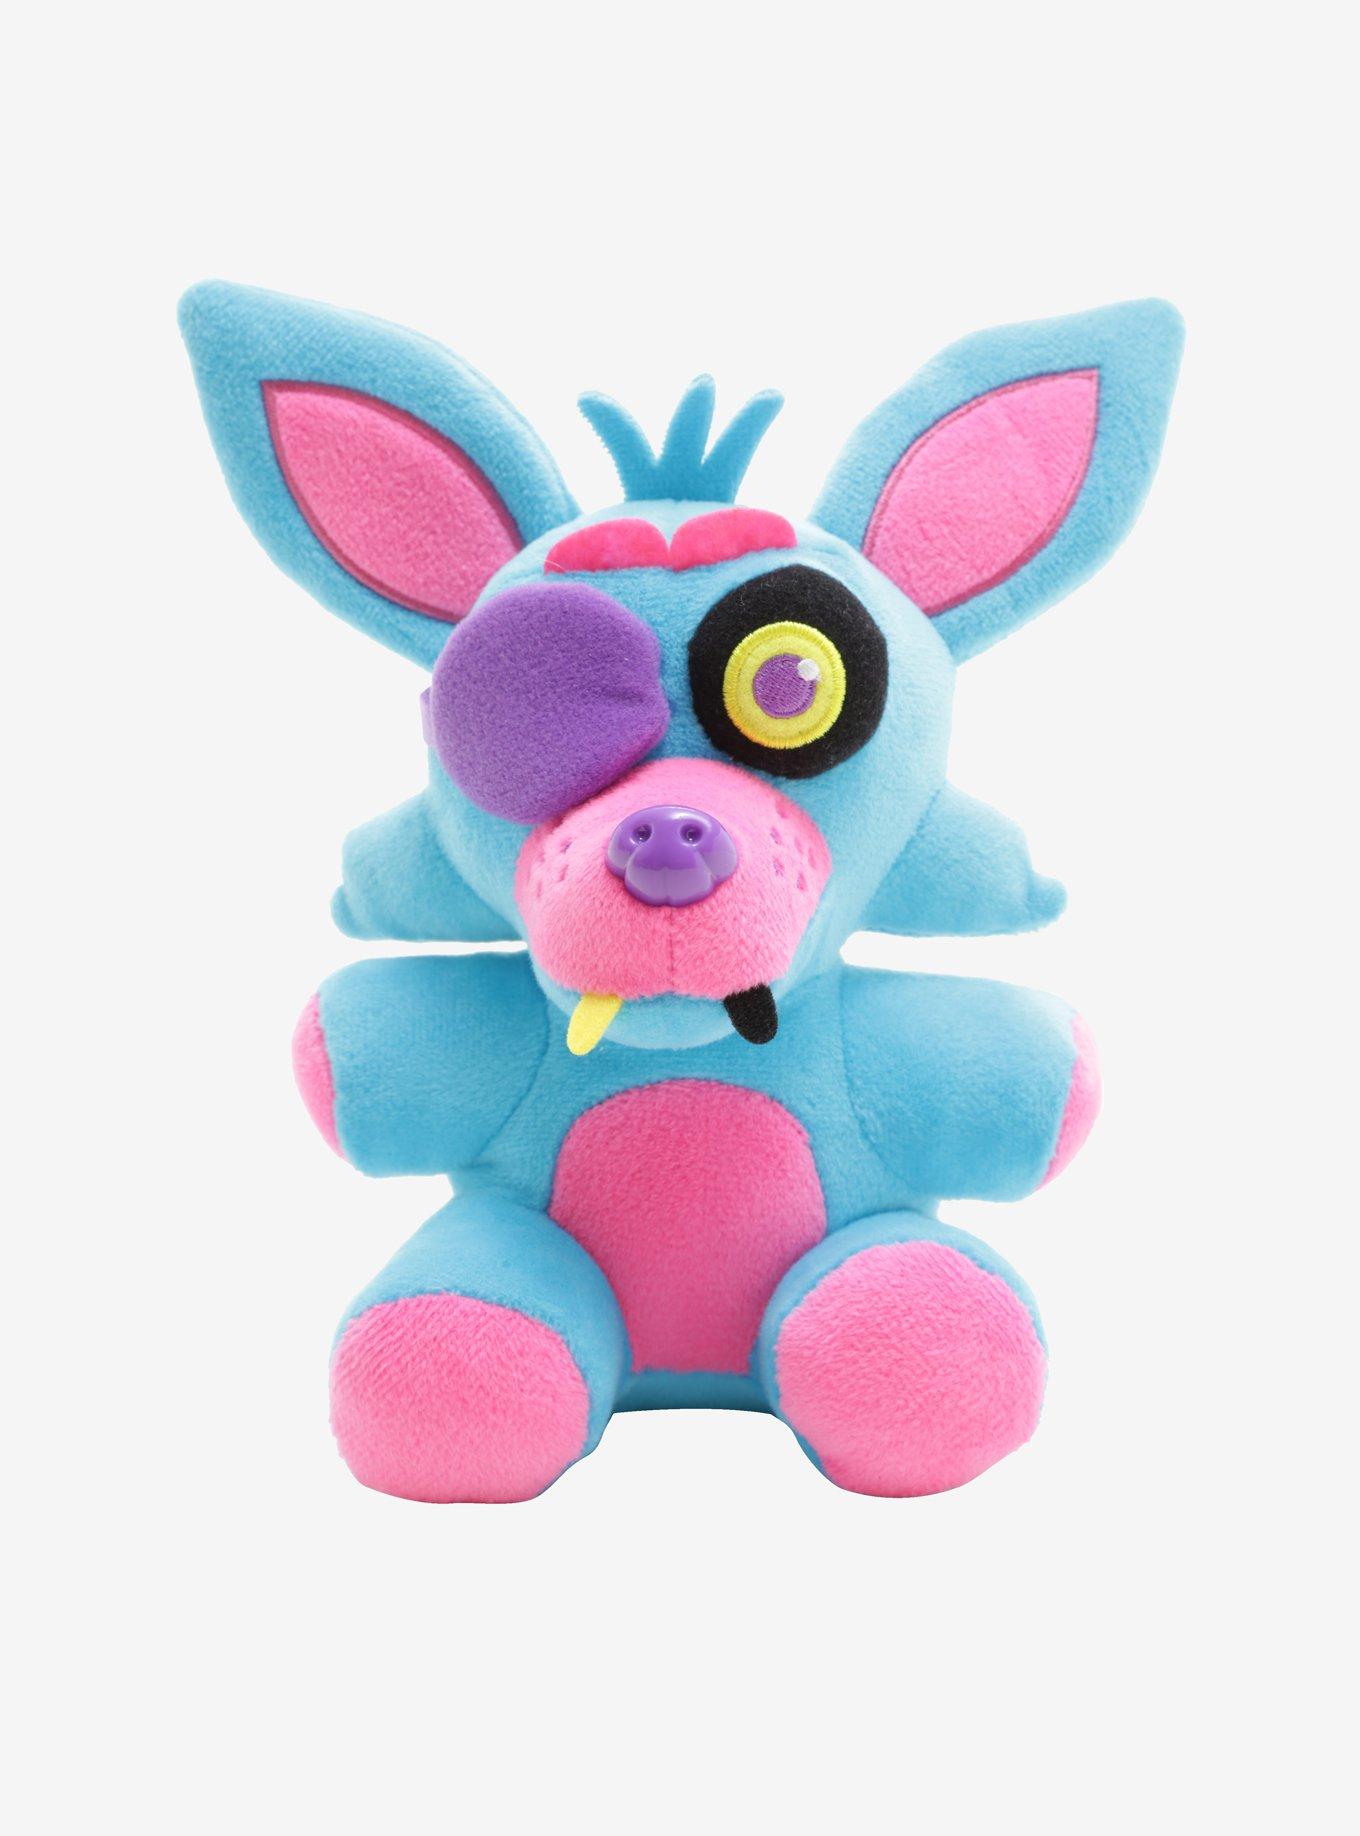 Funko Plushies Five Nights at Freddy's Blacklight Series Collectible Plush  (One Random) Neon Plushies and 2 My Outlet Mall Stickers 